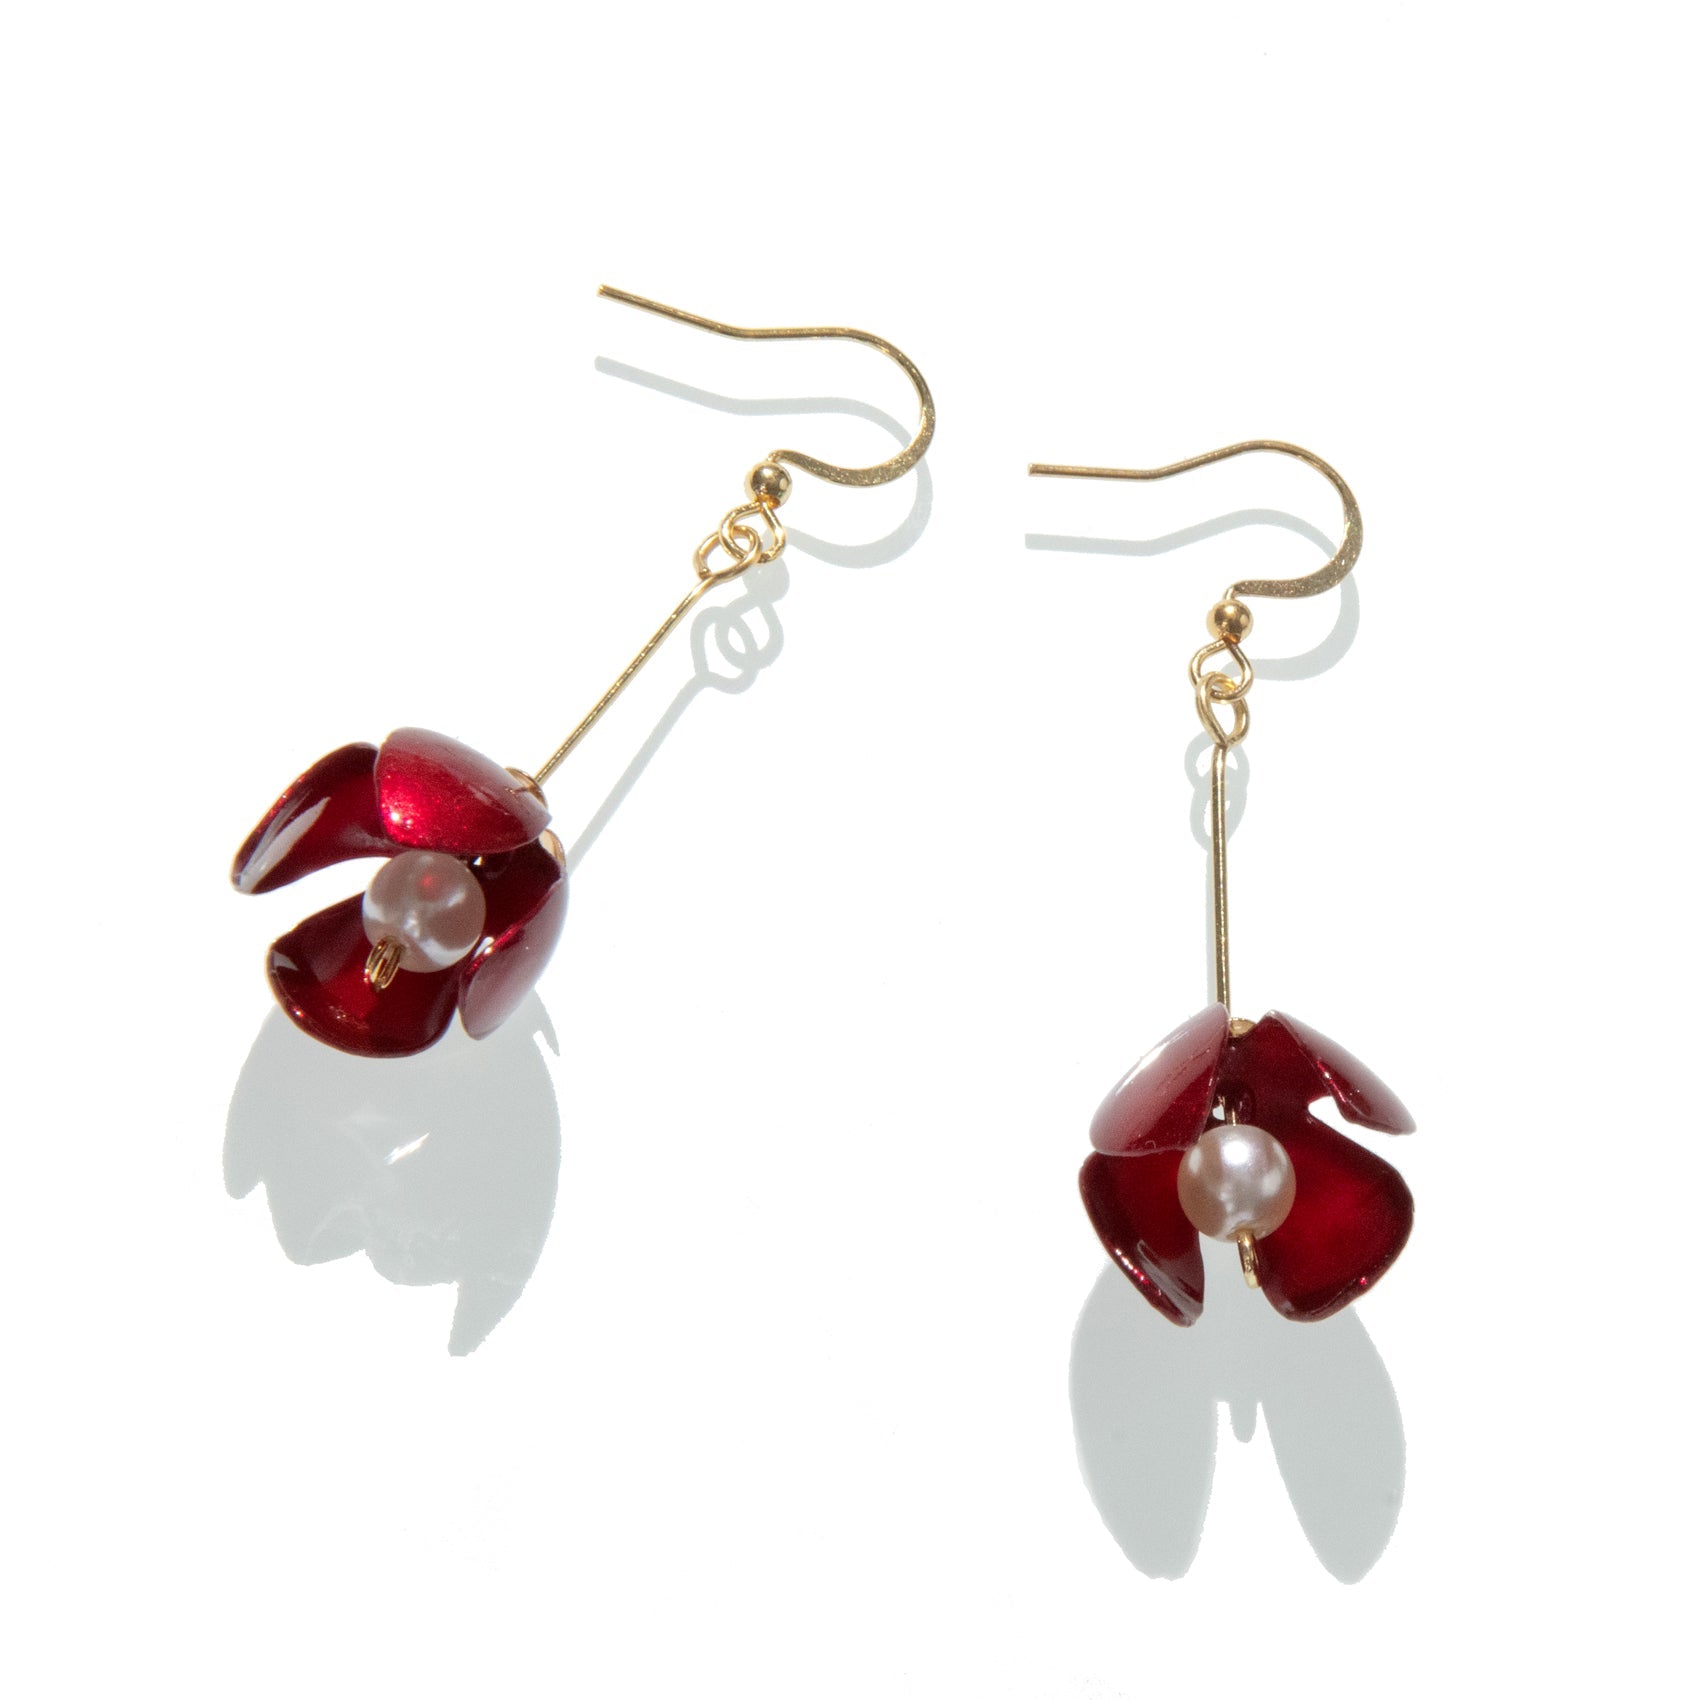 Small Lily Drop Earrings - Red